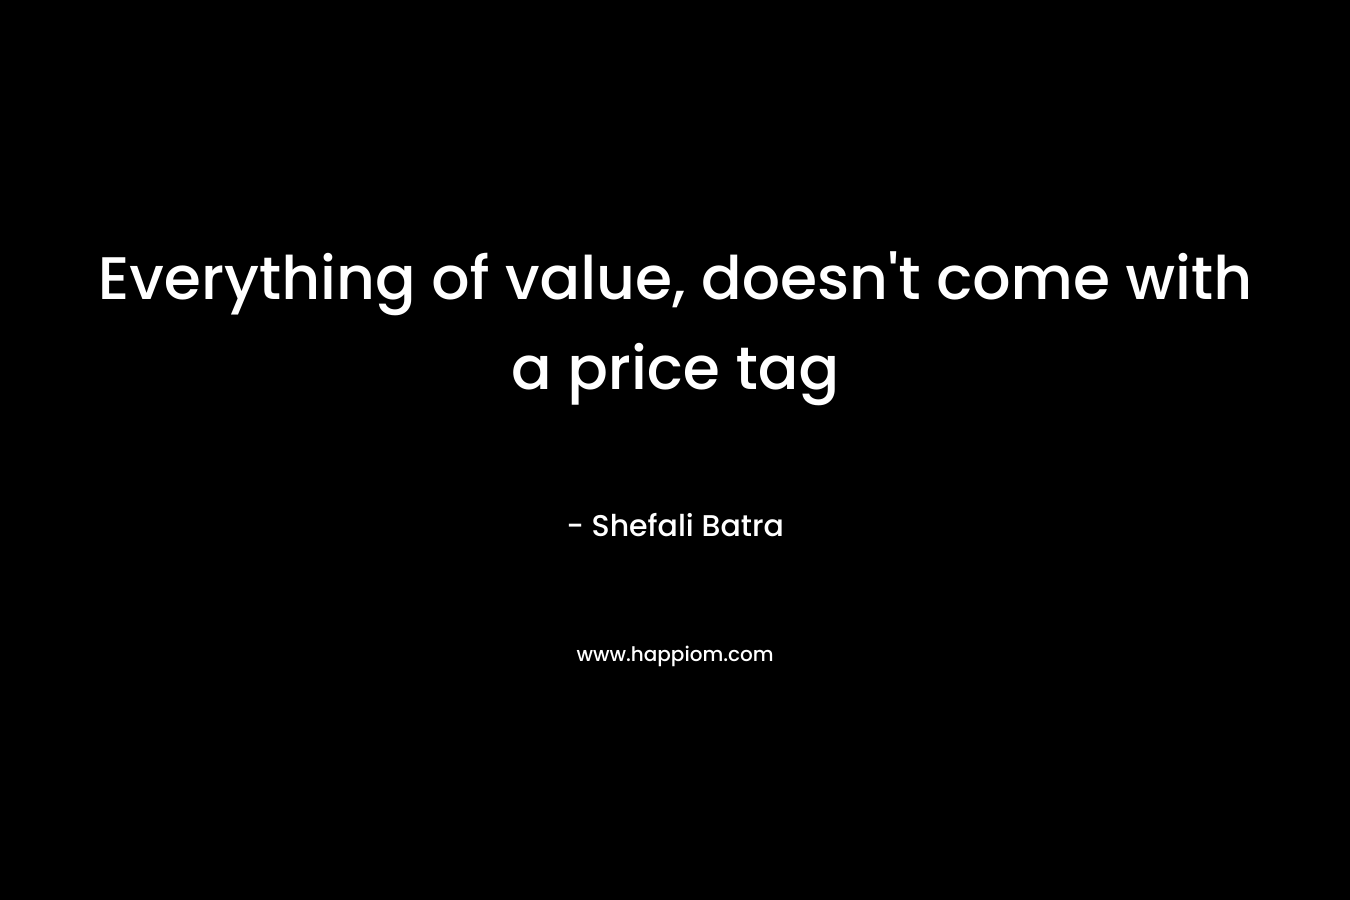 Everything of value, doesn't come with a price tag